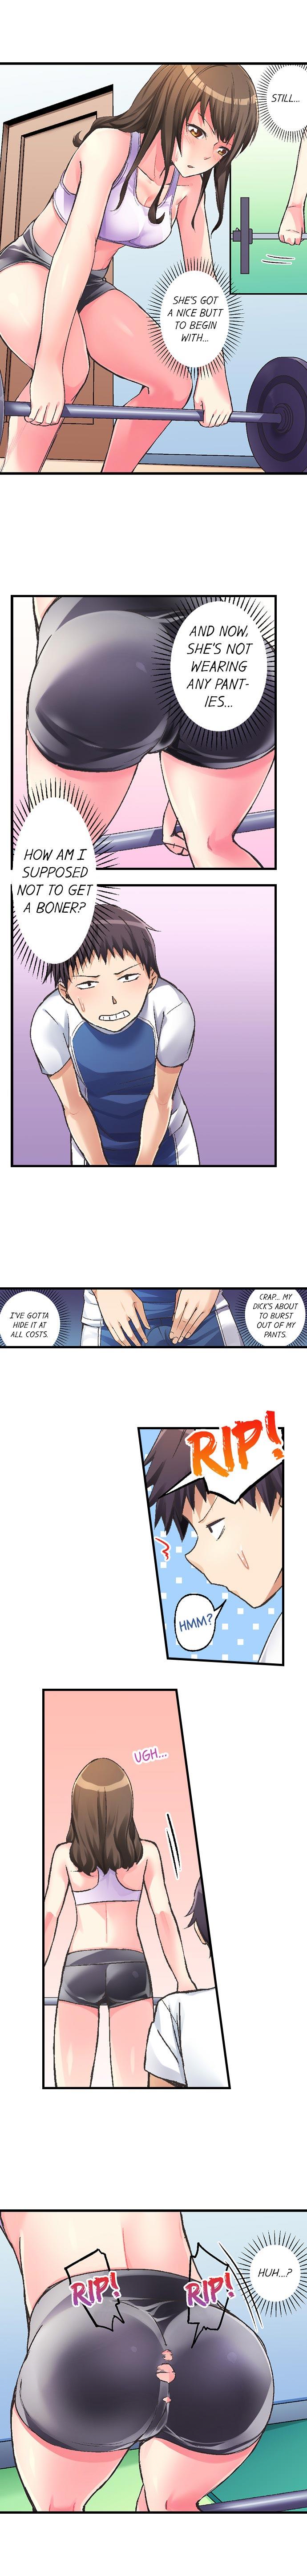 No Panty Booty Workout! Ch. 1 - 8 16